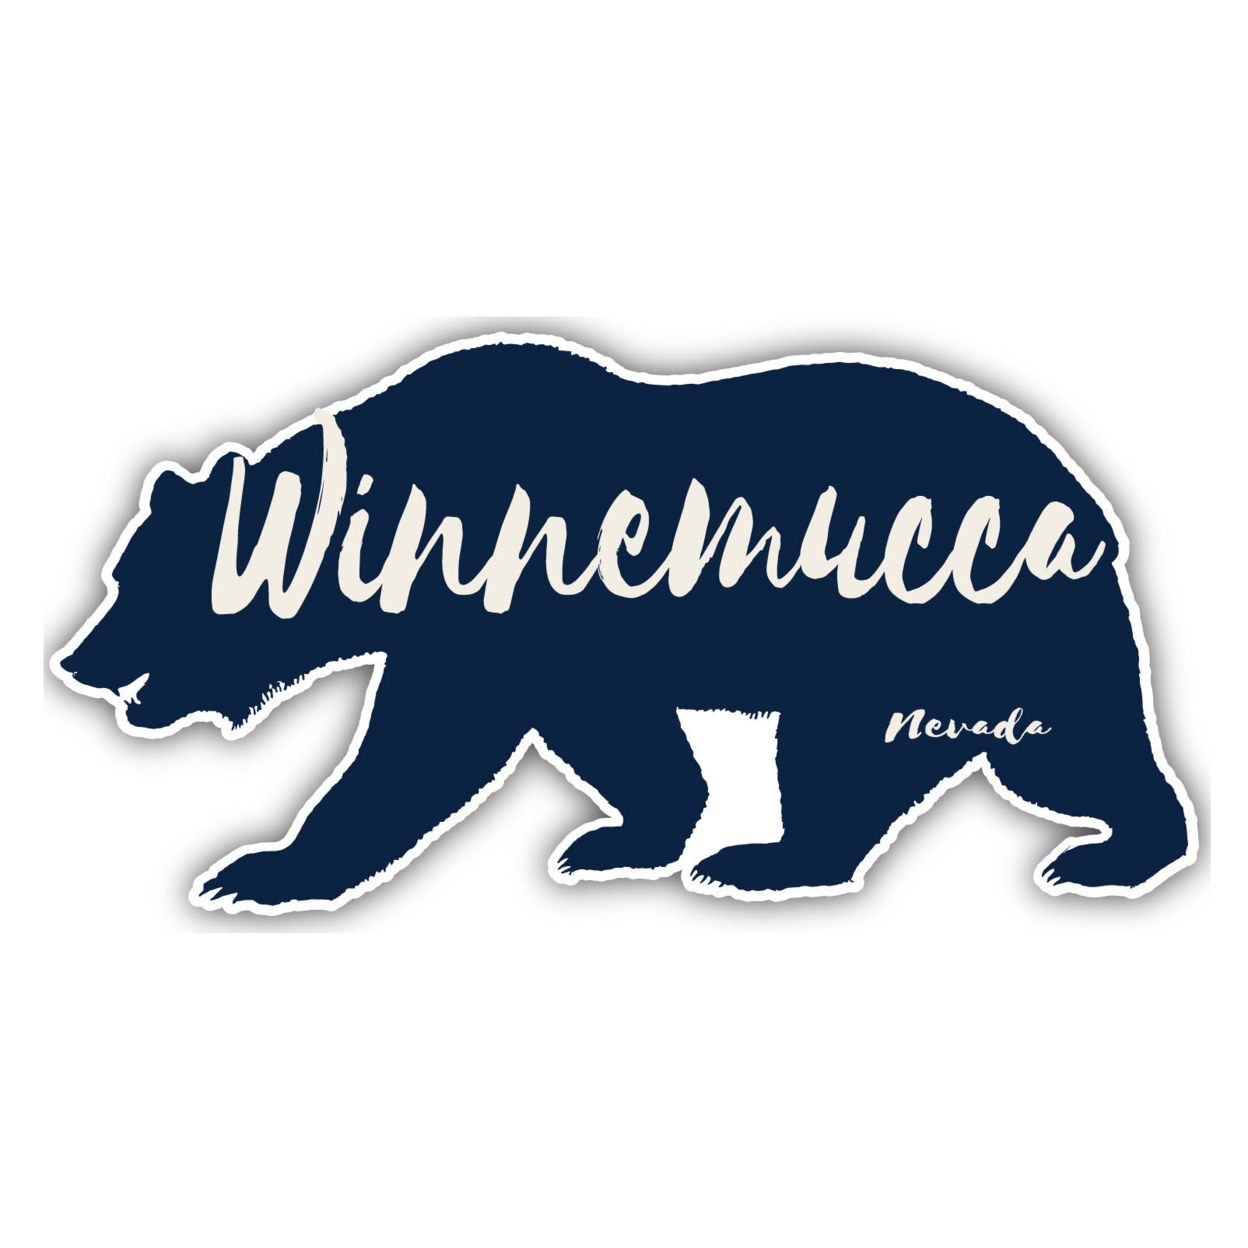 Winnemucca Nevada Souvenir Decorative Stickers (Choose Theme And Size) - Single Unit, 2-Inch, Great Outdoors